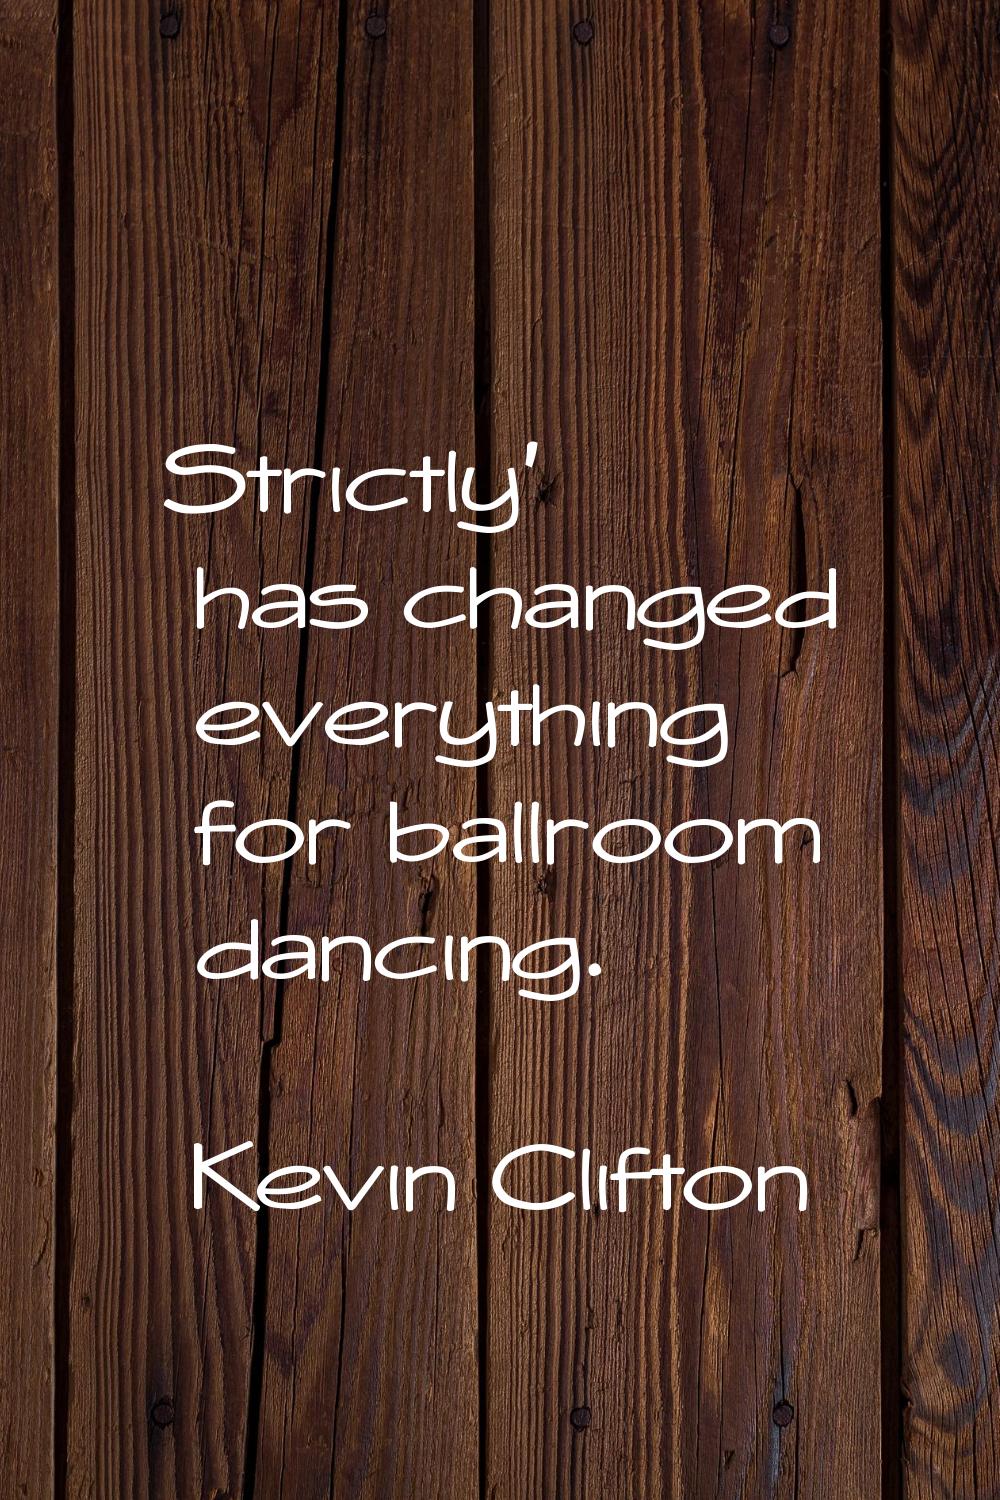 Strictly' has changed everything for ballroom dancing.